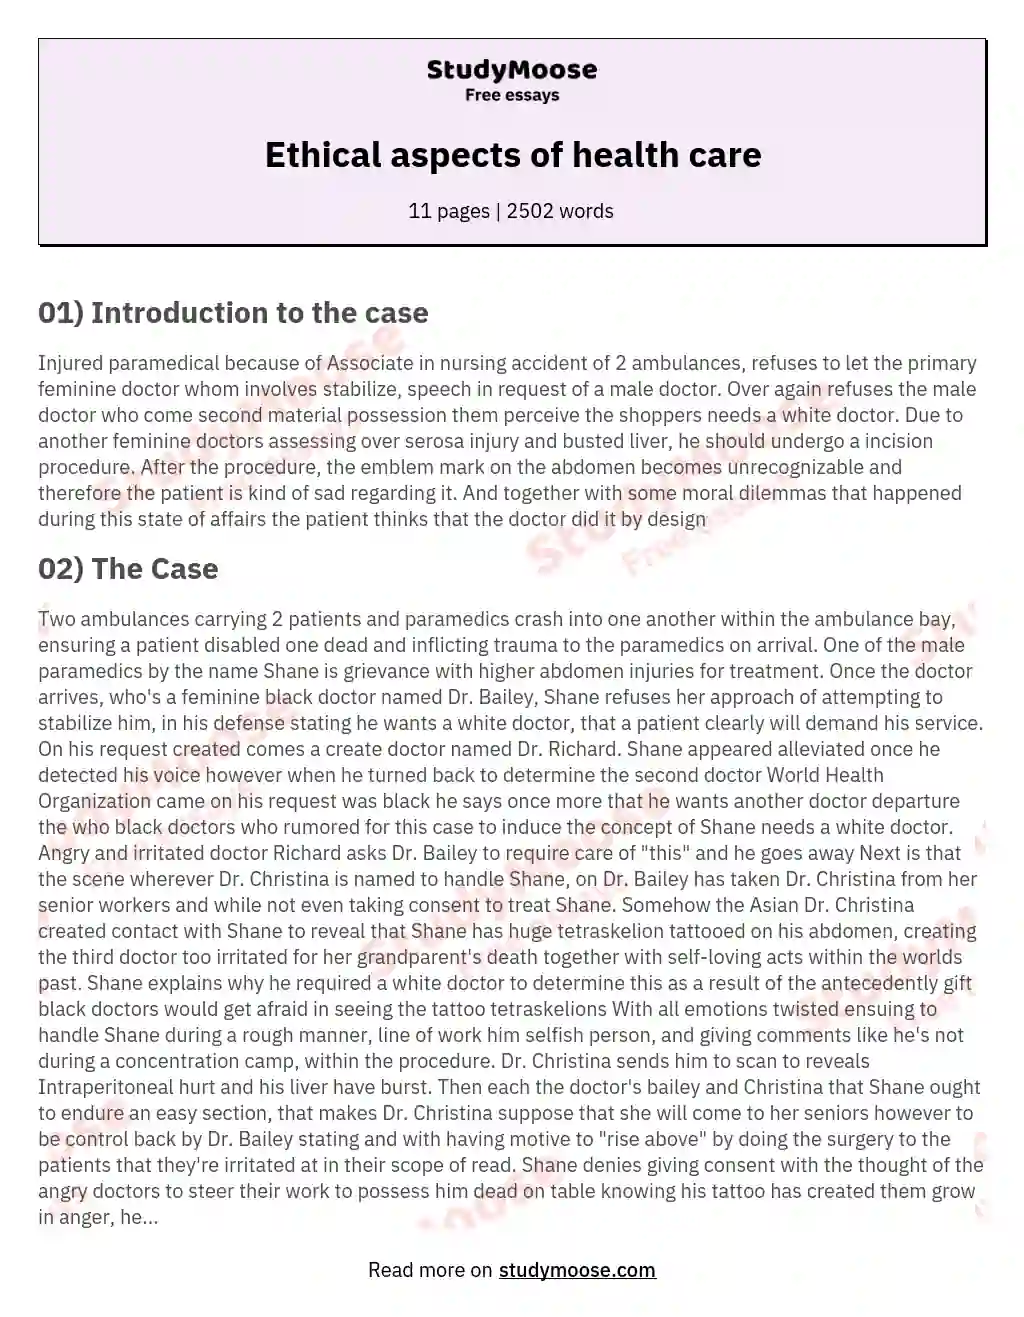 Ethical aspects of health care essay